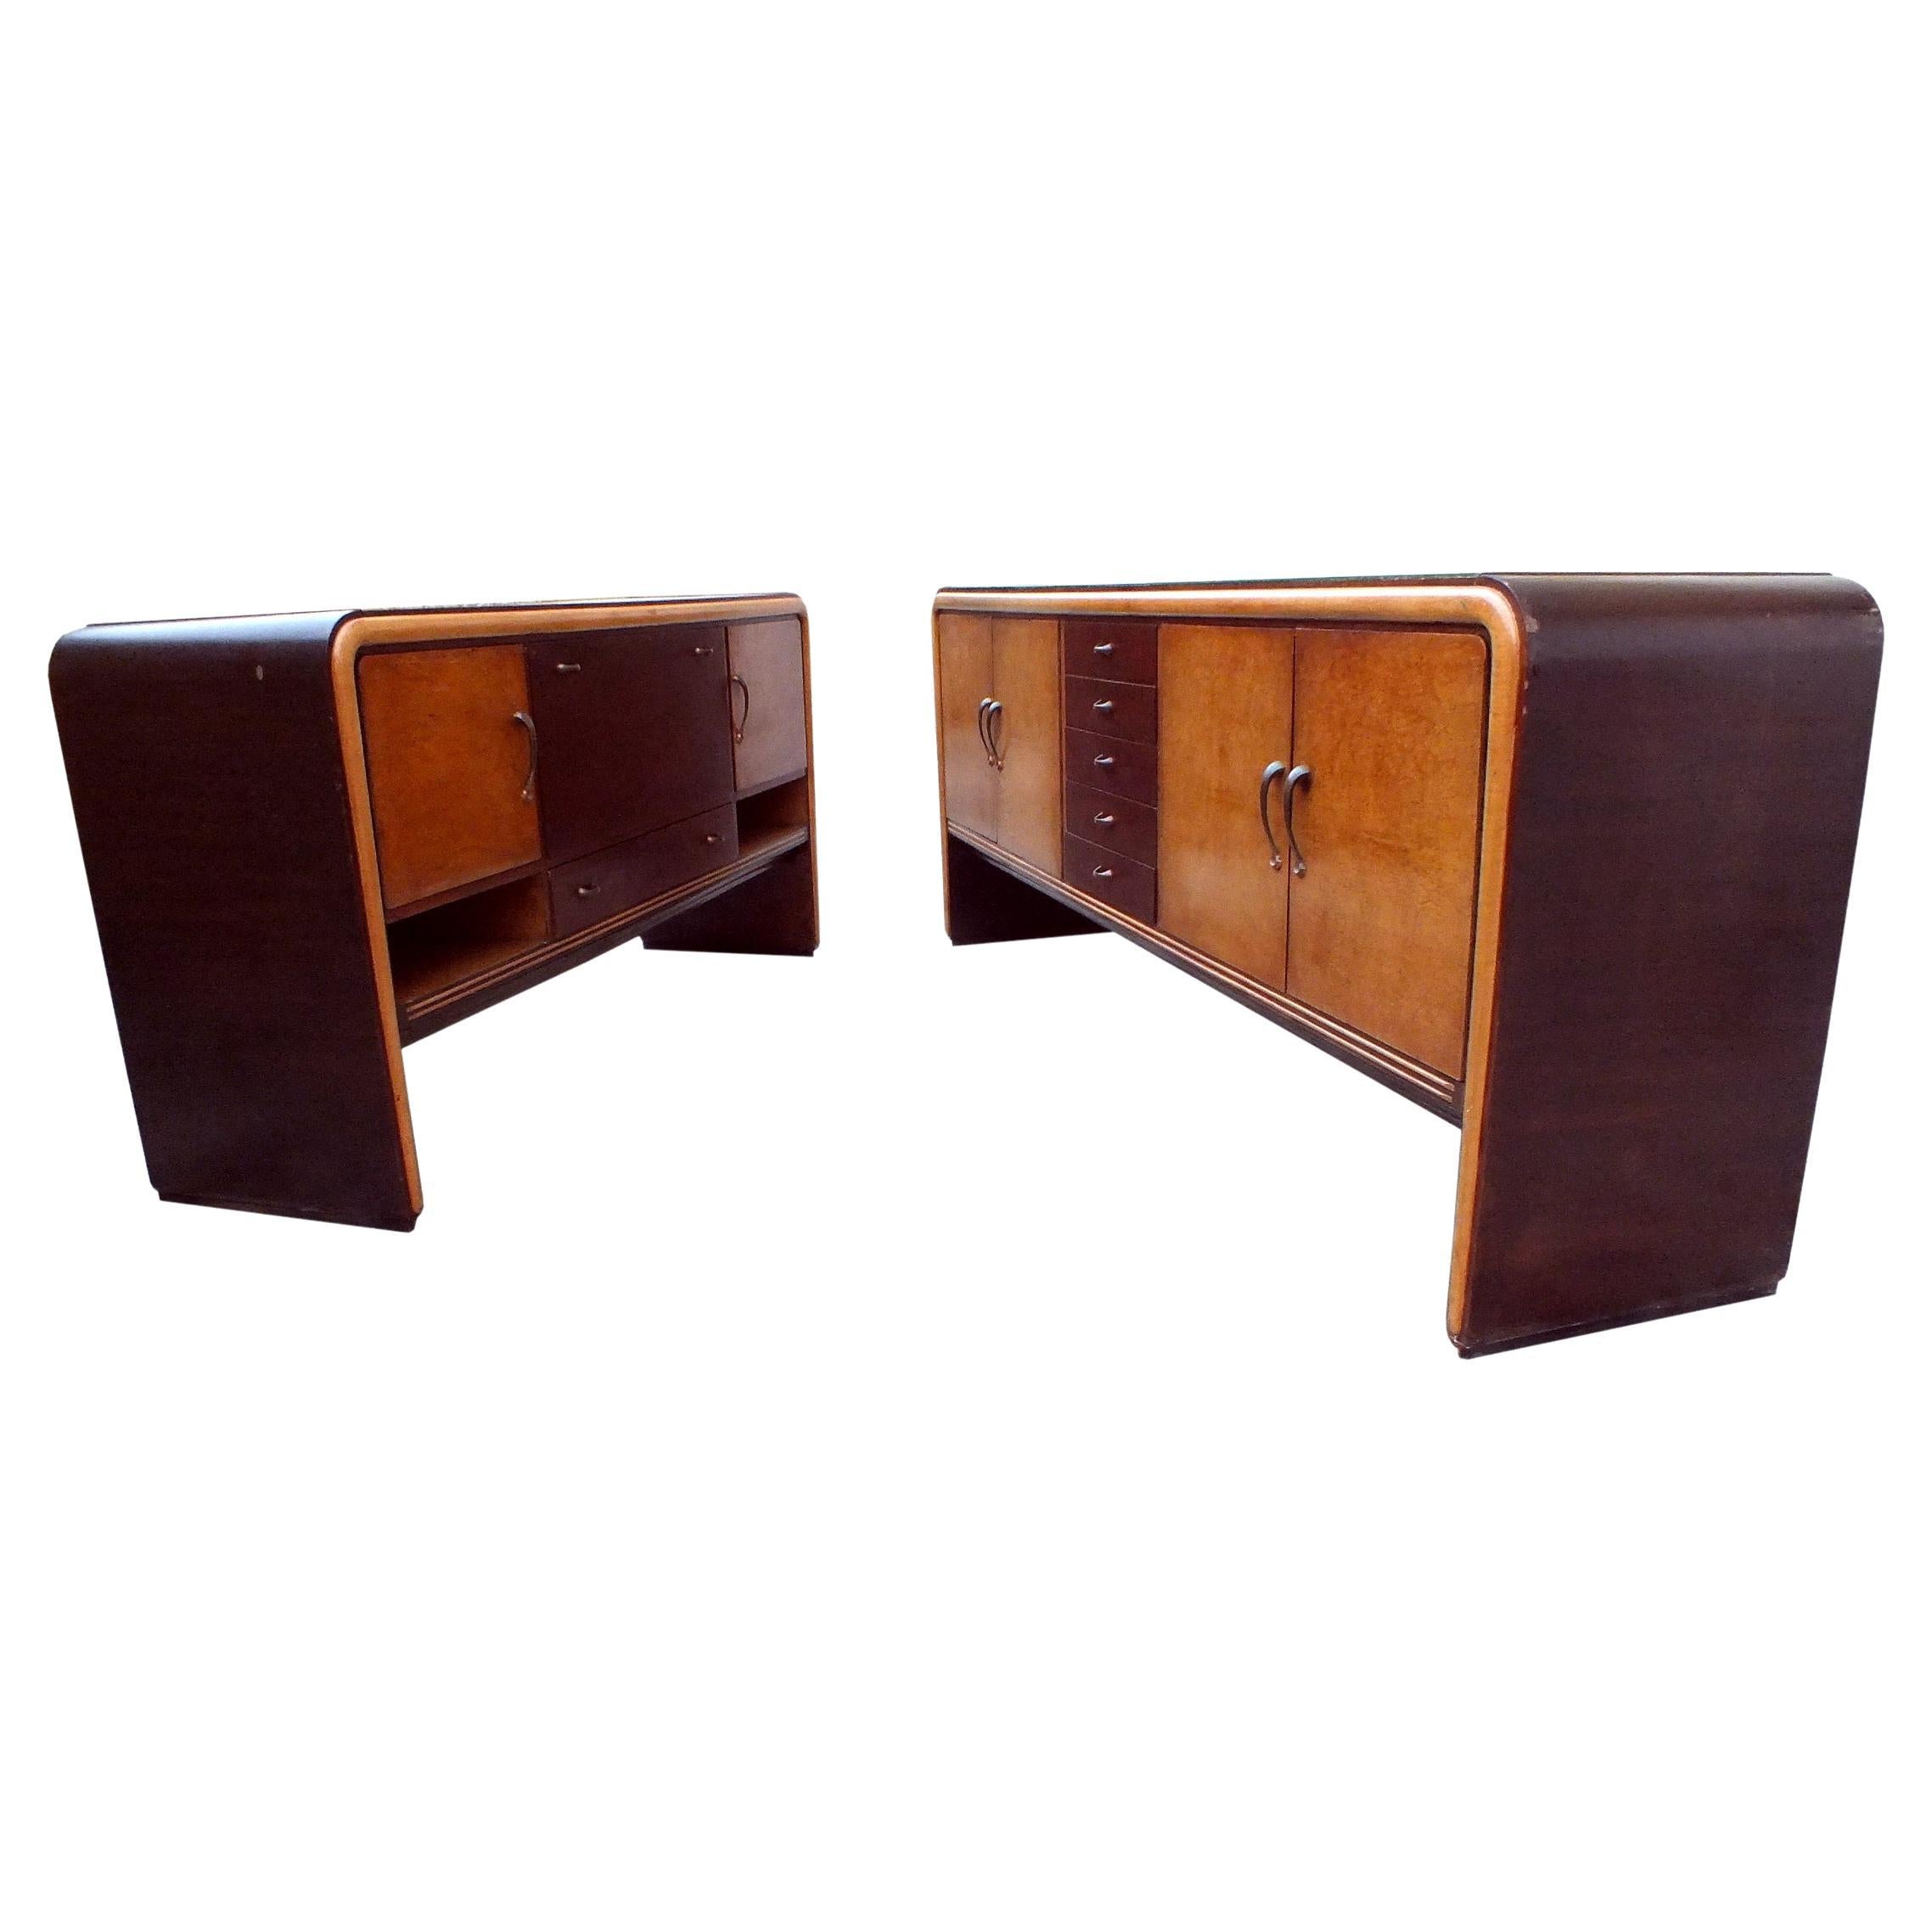 1930s attributed to Borsani/Buffa Sideboard & Cabinet, Set of 2 For Sale